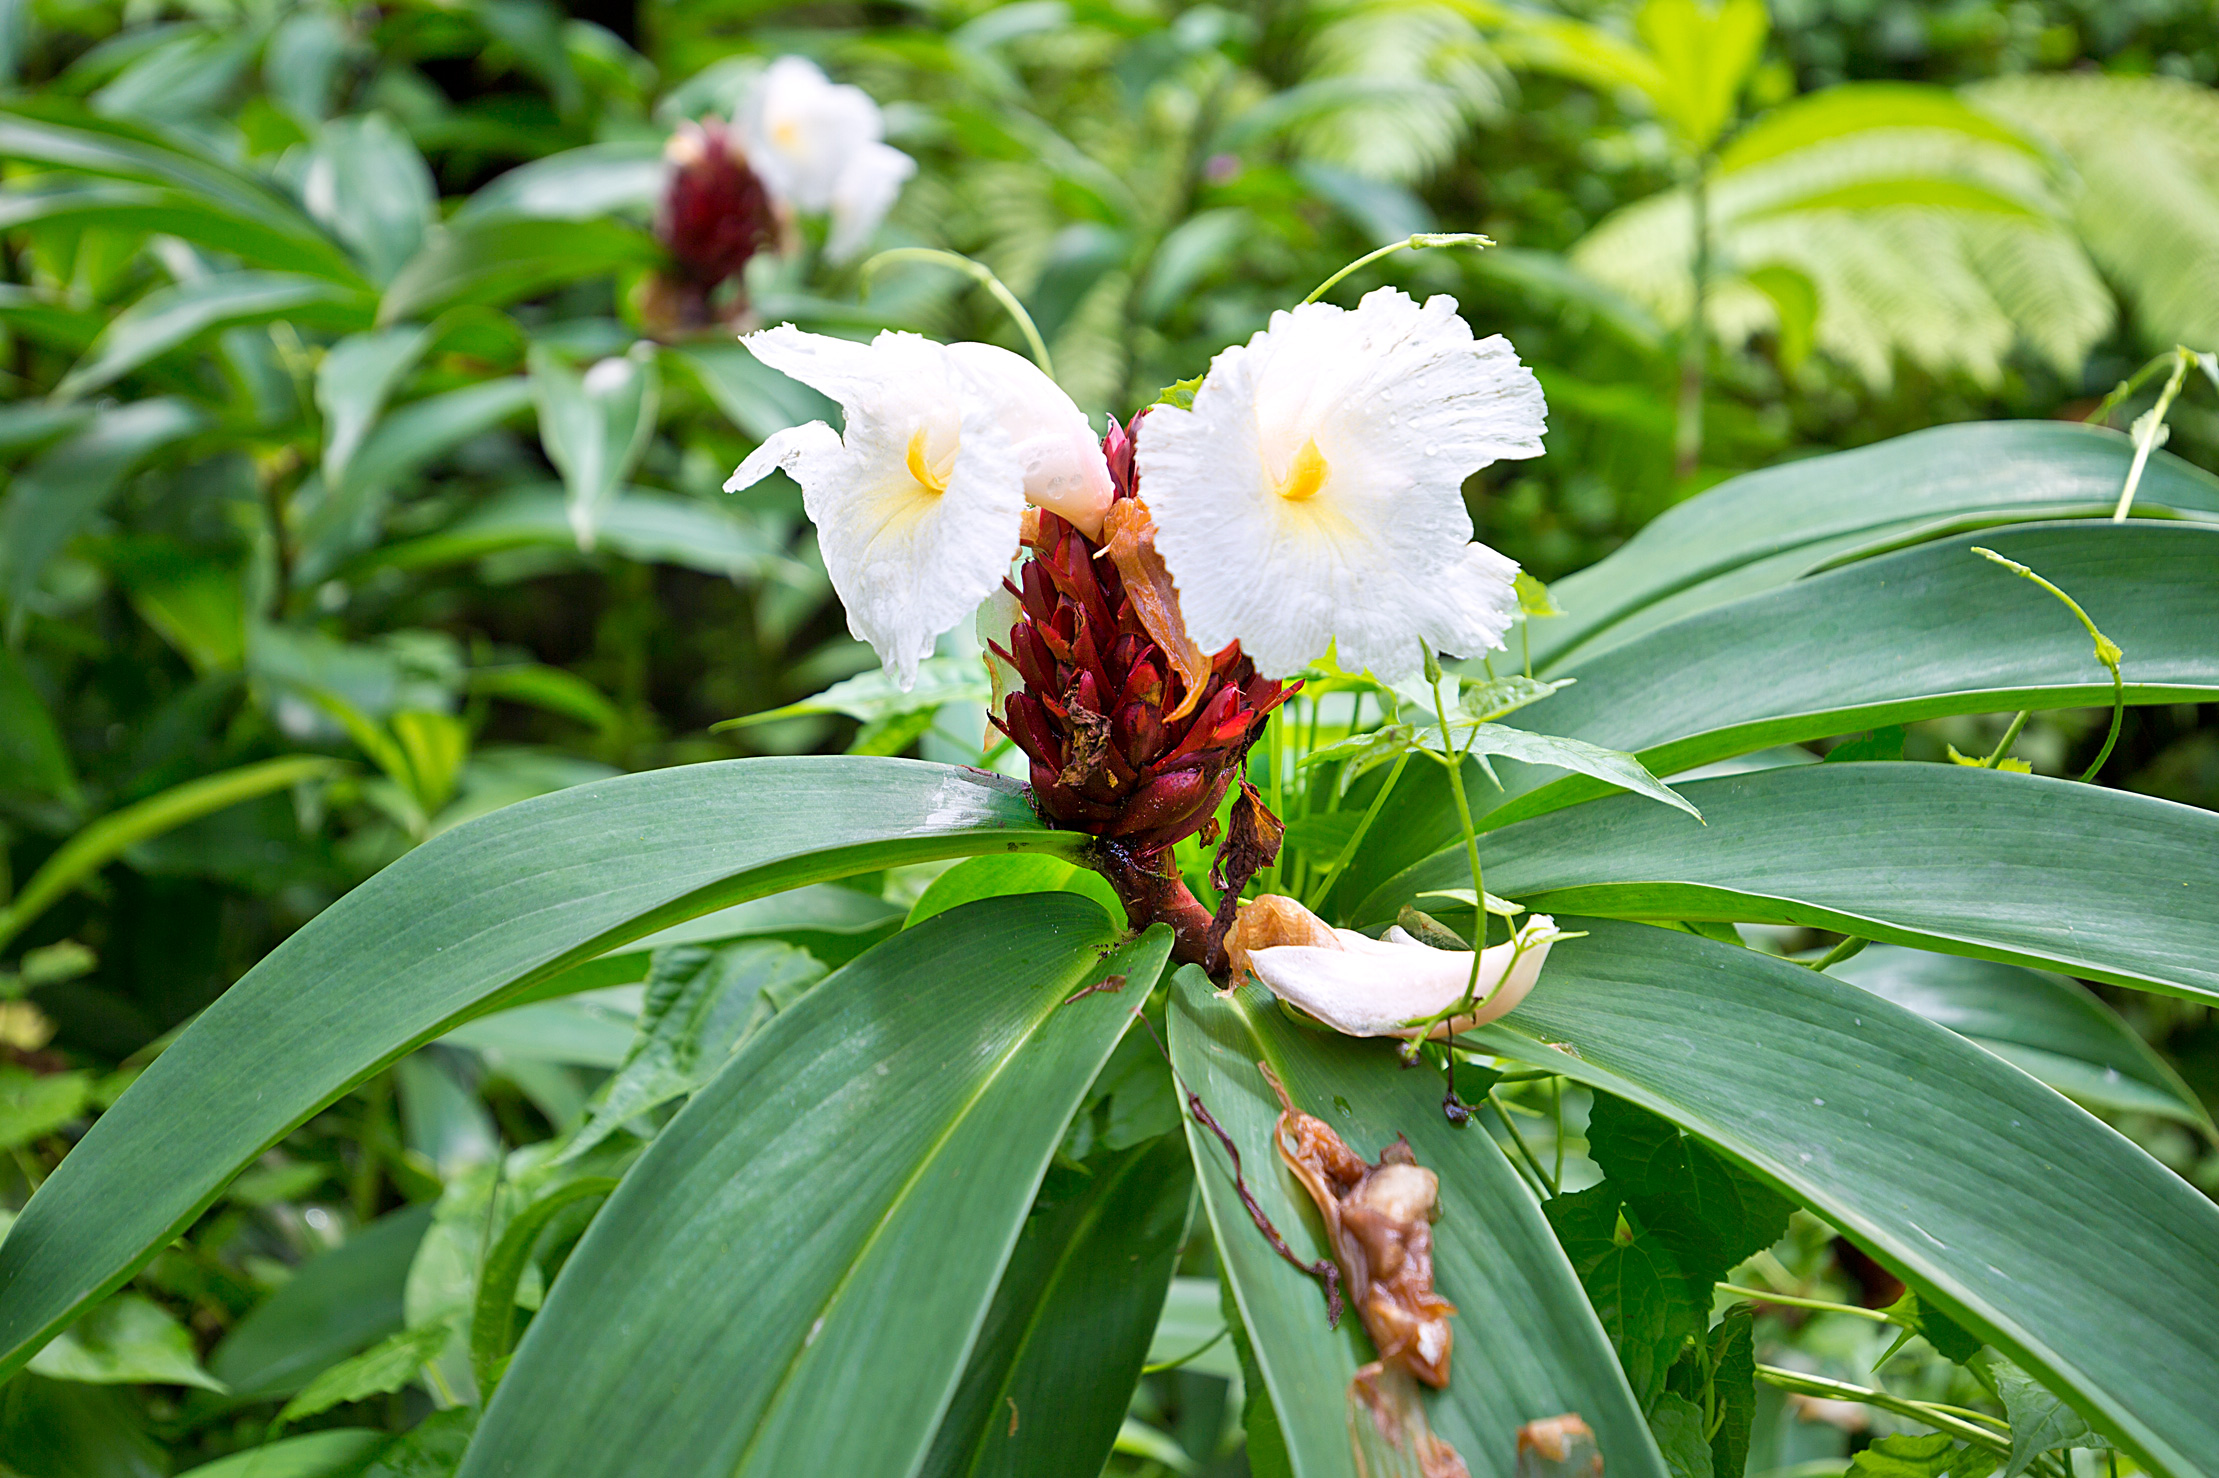 One of the many beautiful flowers in American Samoa National Park